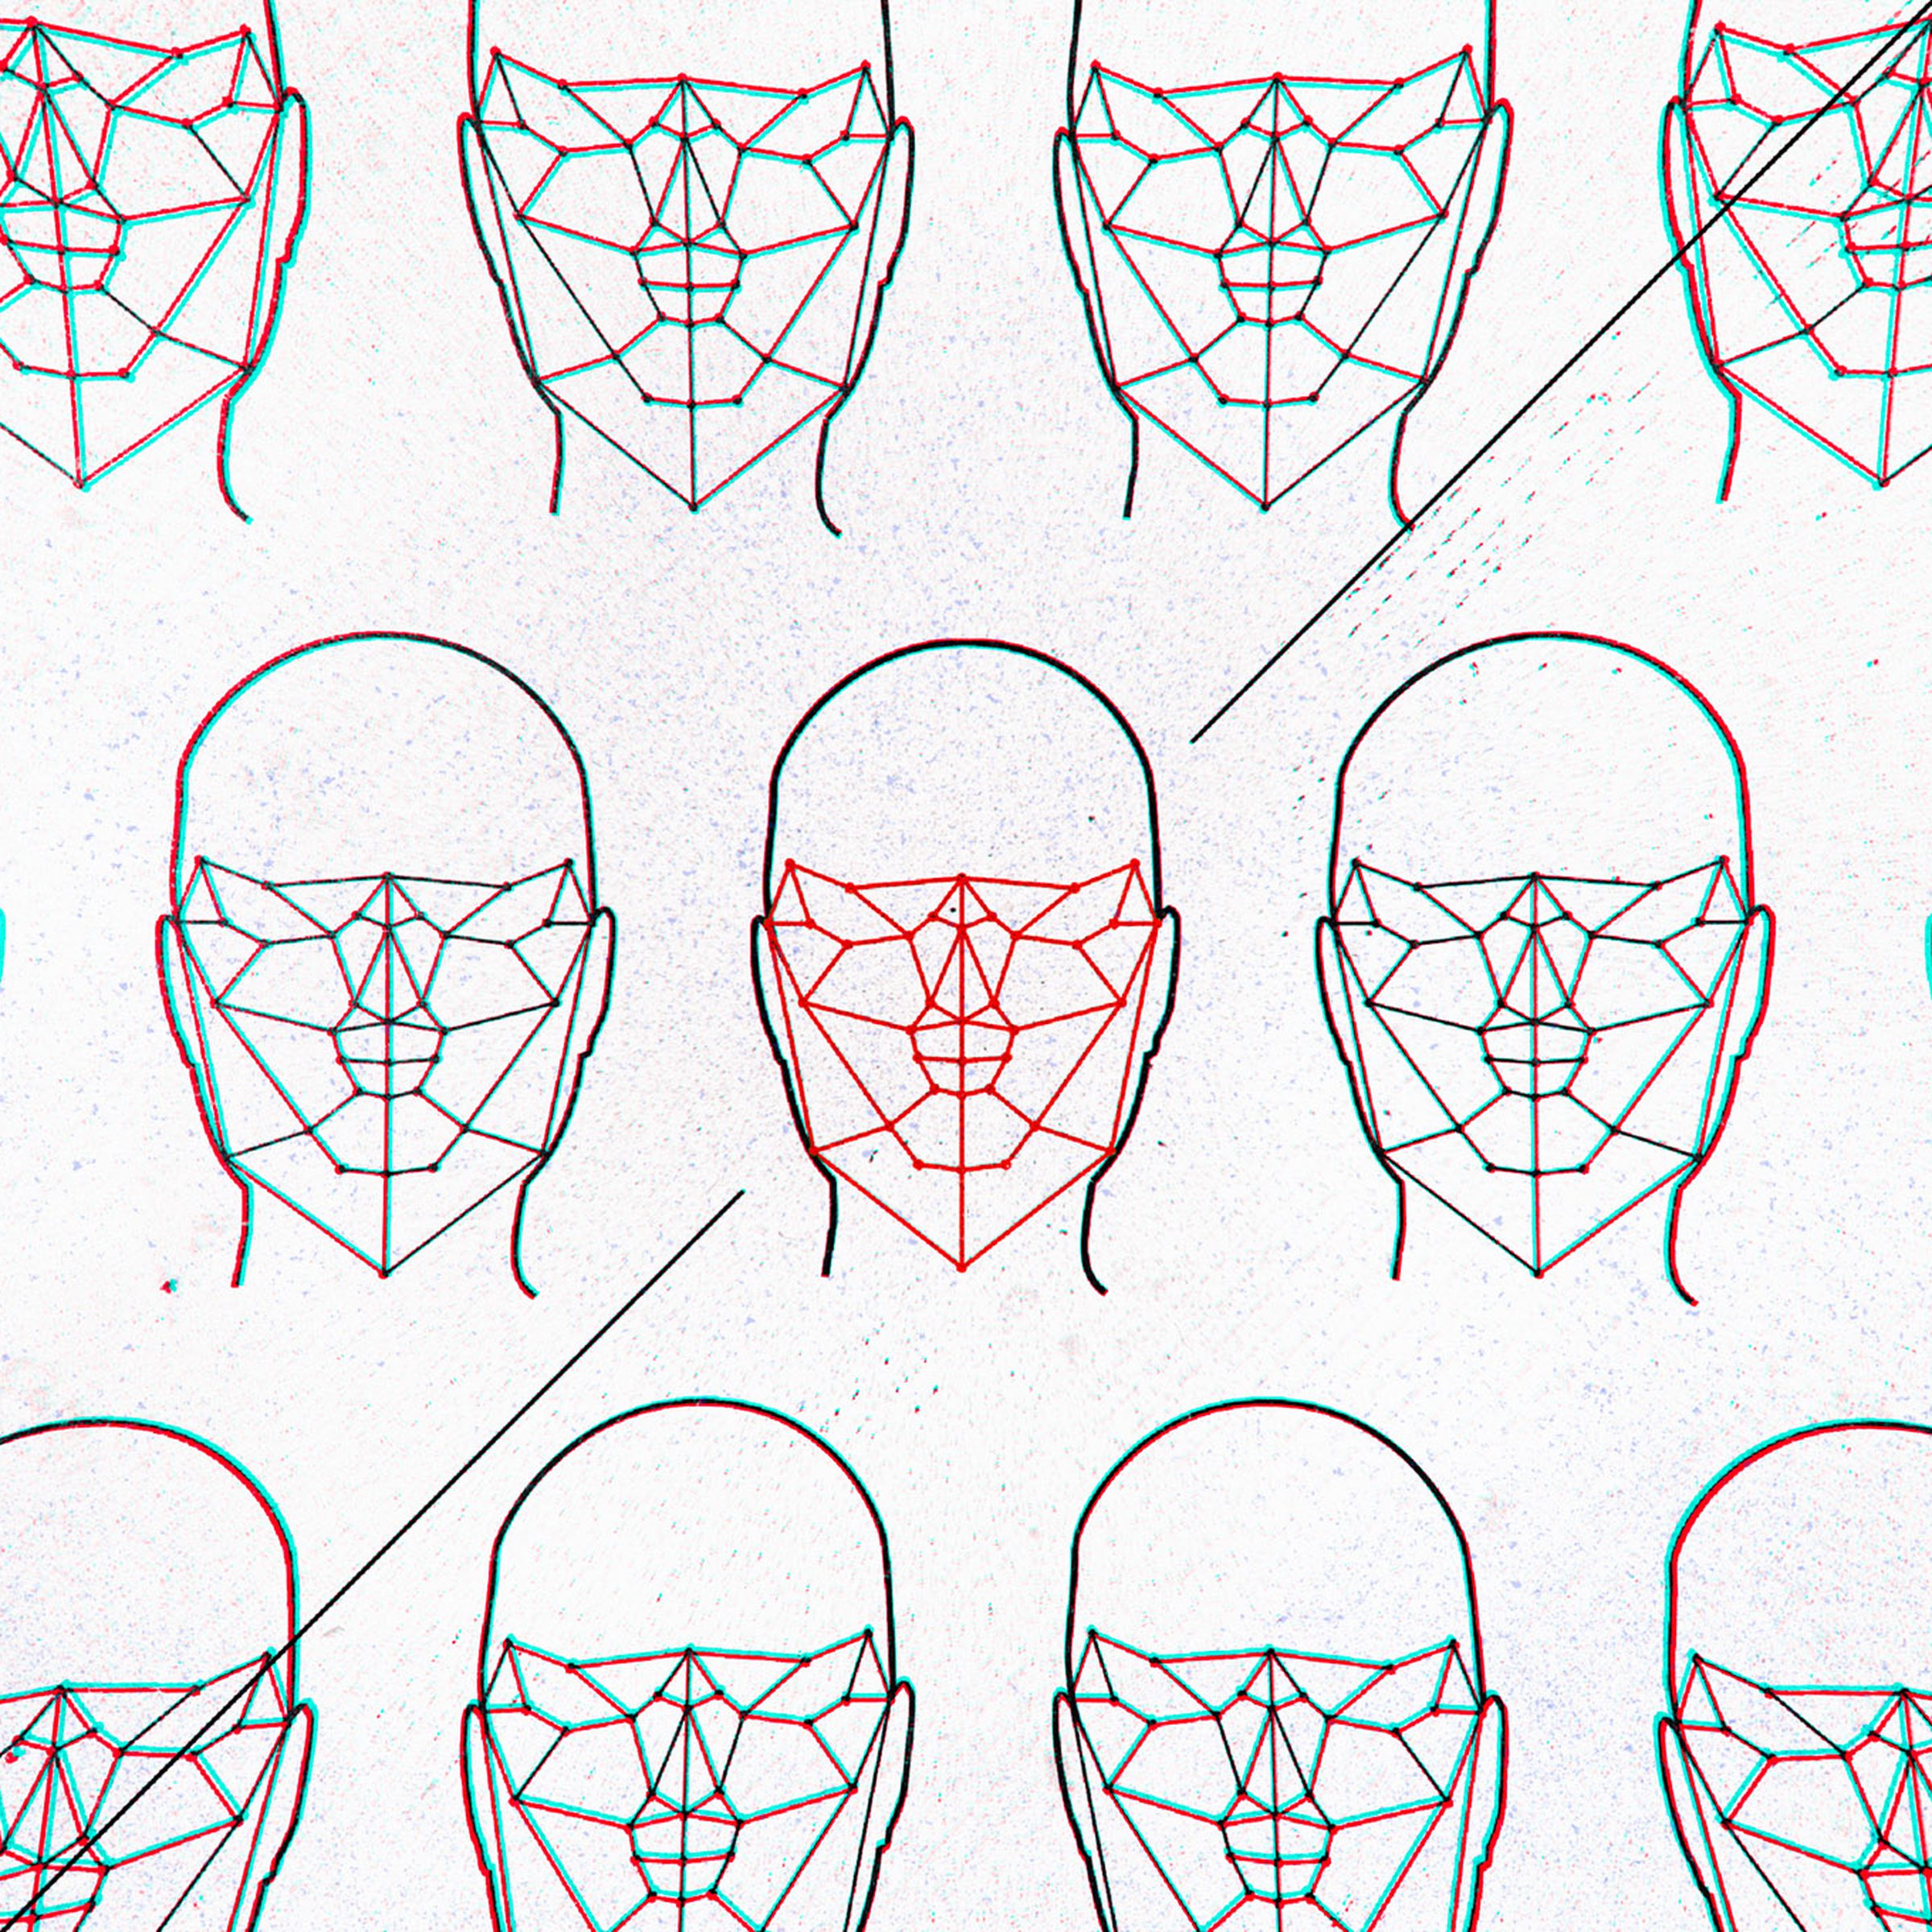 A series of wireframe faces.